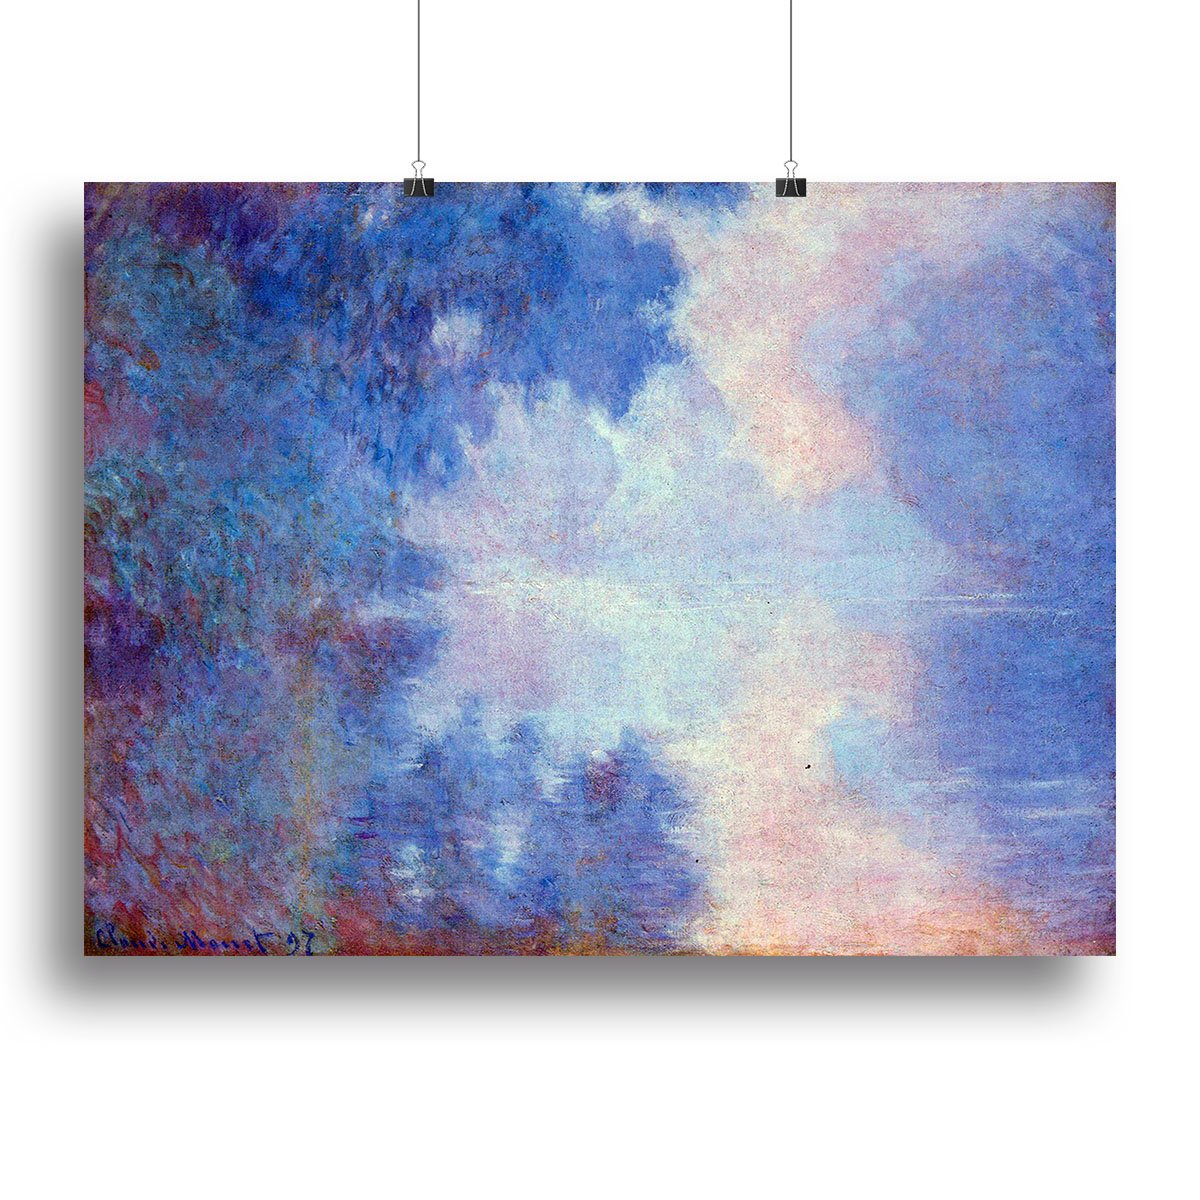 Seine in Morning by Monet Canvas Print or Poster